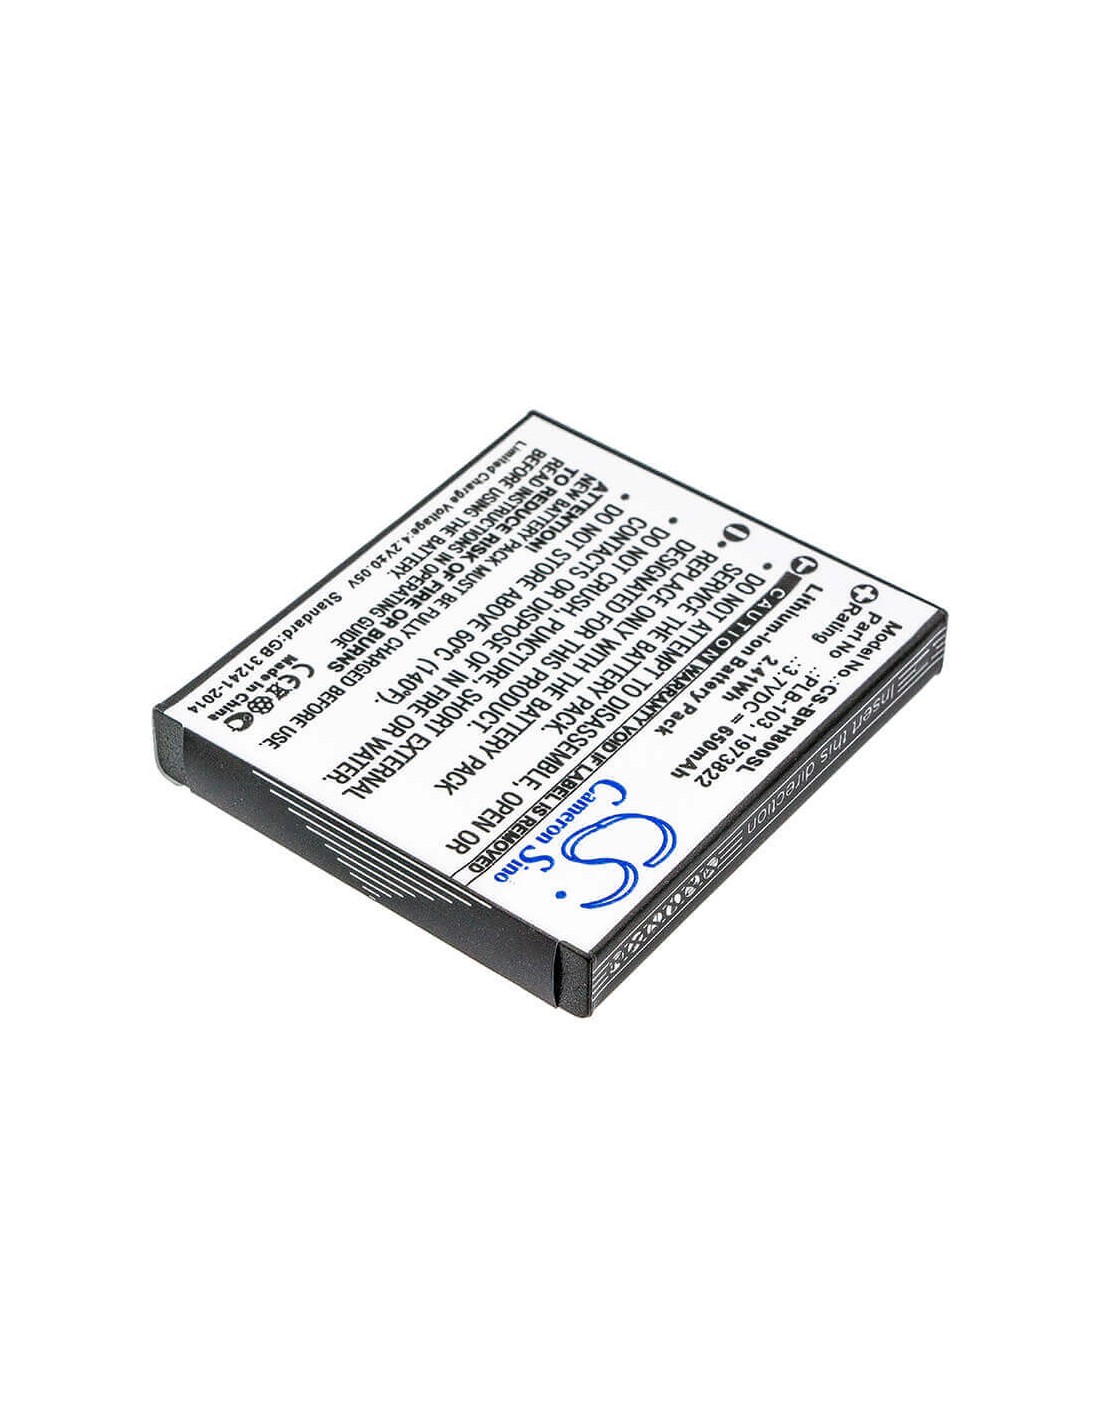 Battery for Bang & Olufsen, Beoplay H7, Beoplay H8, Beoplay H9 3.7V, 650mAh - 2.41Wh